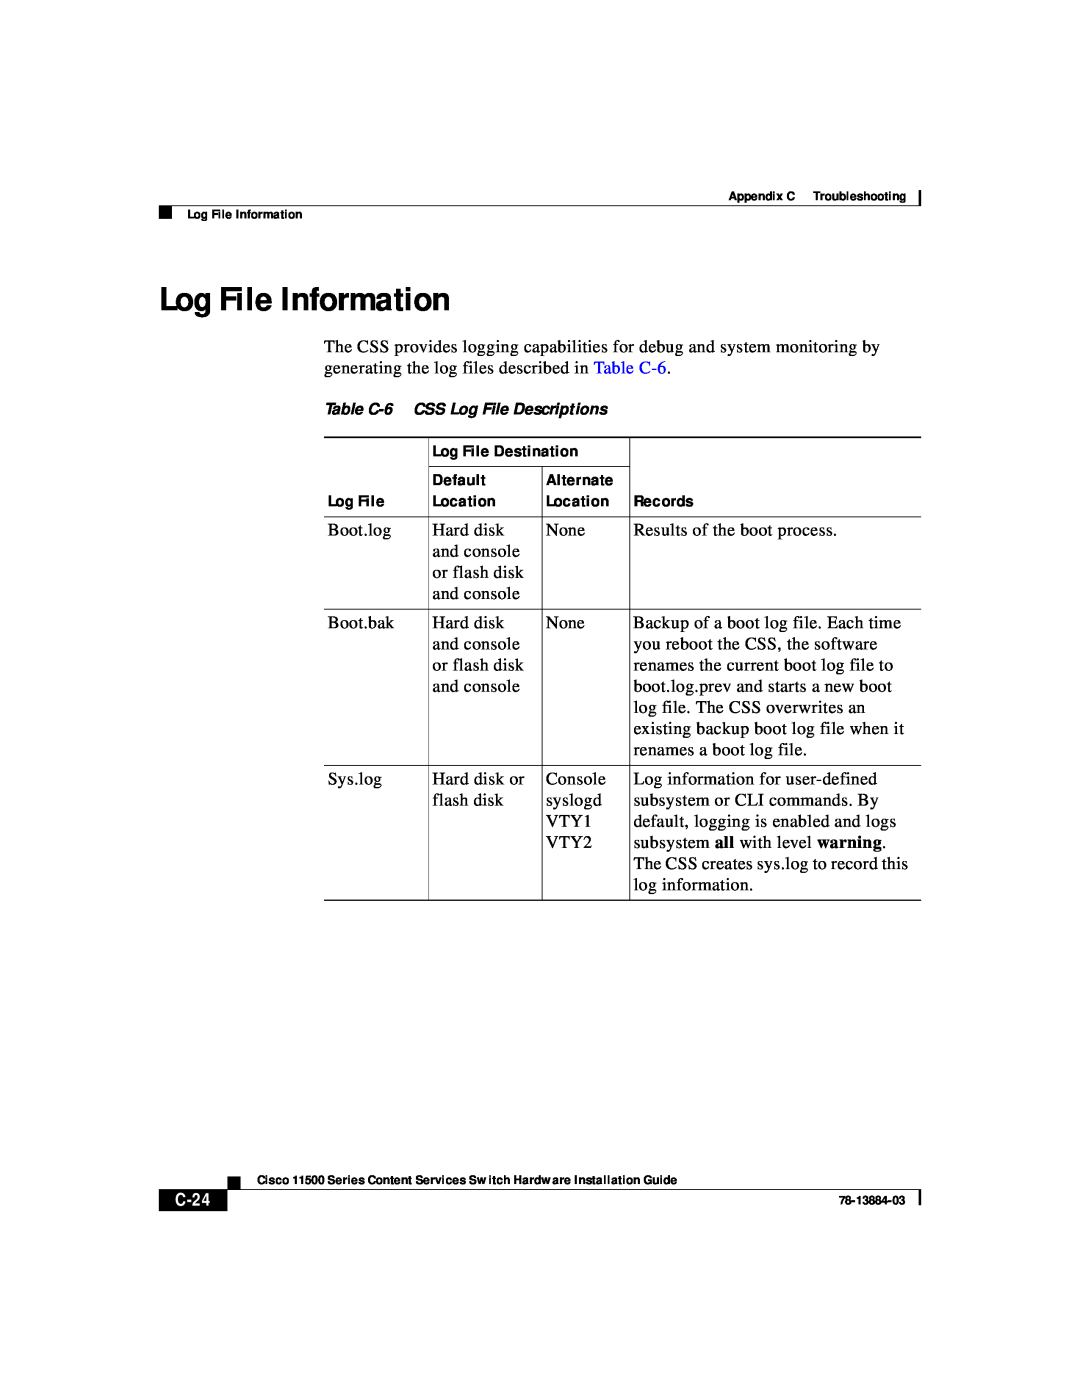 Cisco Systems 11500 Series manual Log File Information, C-24 